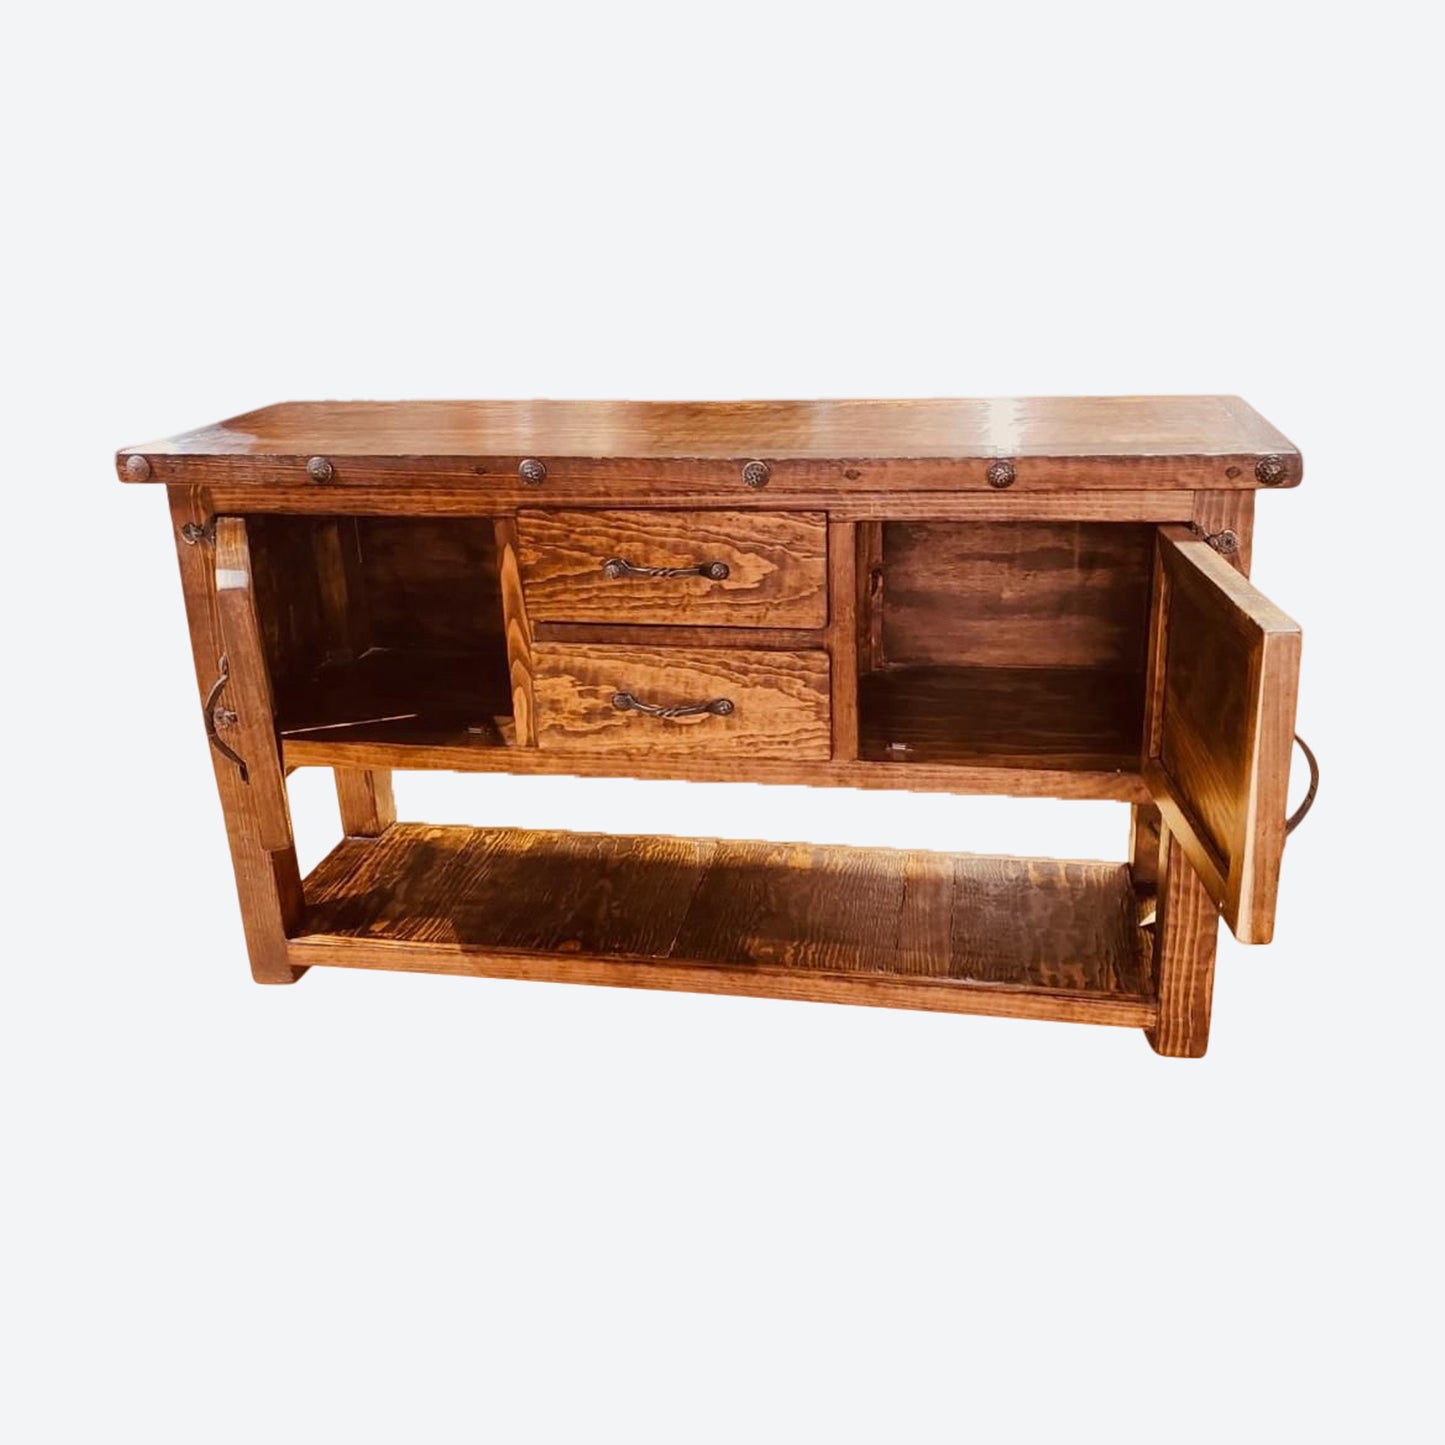 Mesquite   WOOD CENTER CONSOLE TABLE [OPEN BOTTOM] -SK (TWO DRAWERS) -SKU 1088